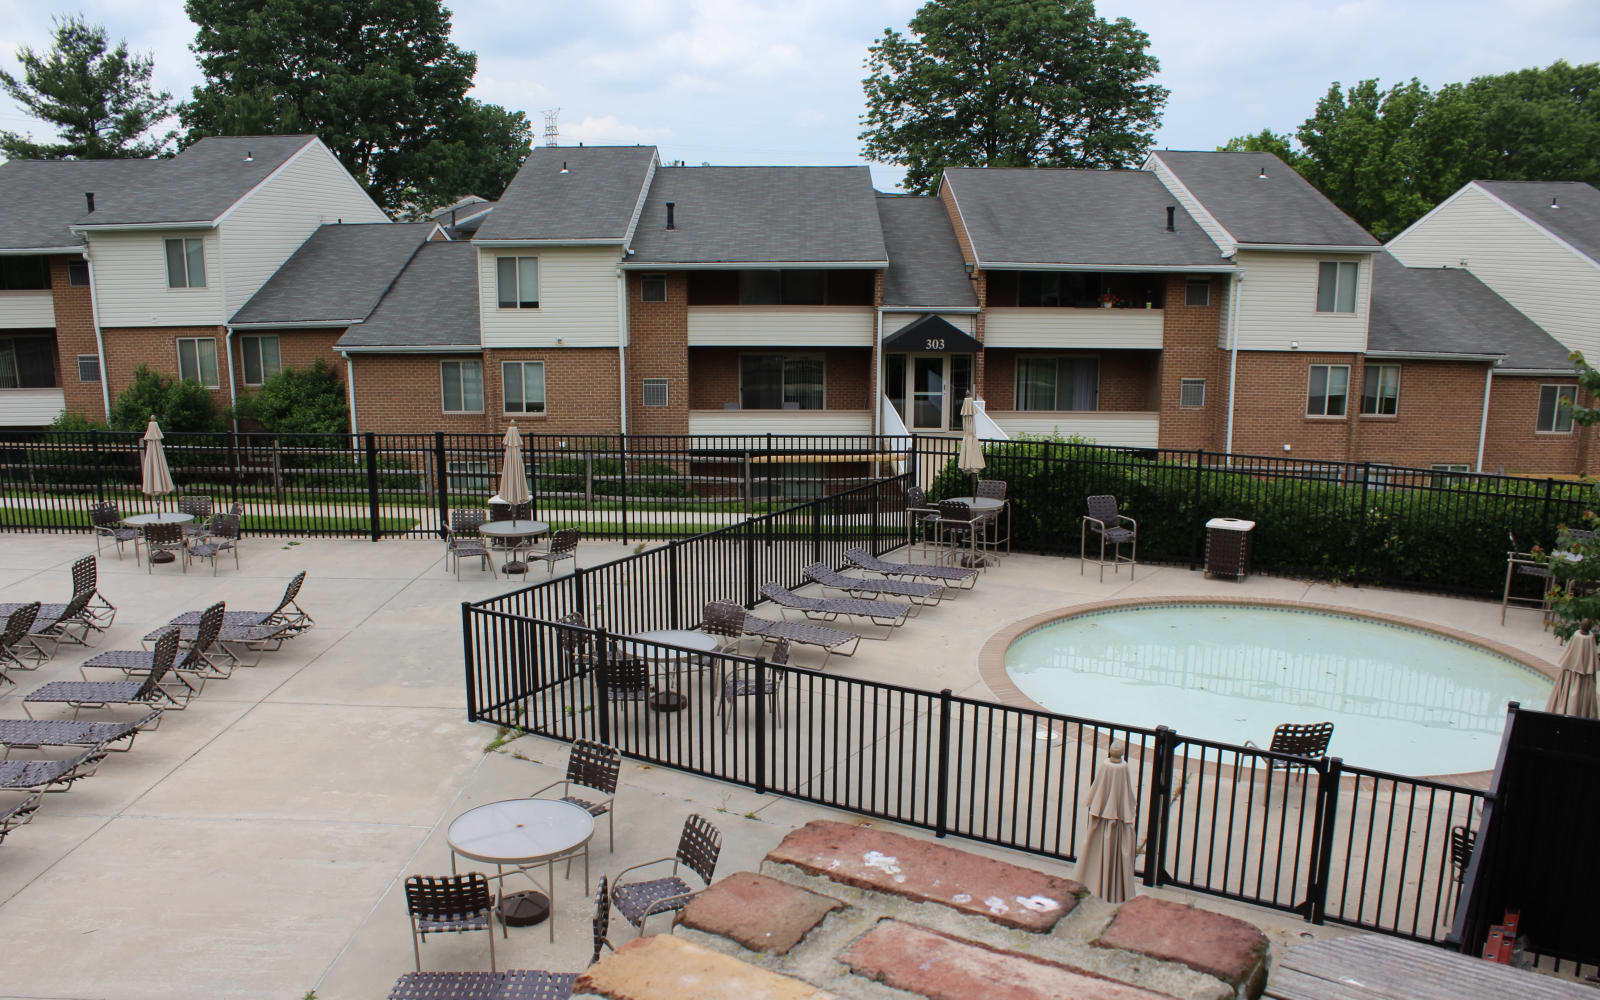 Hot tub for residents at Hunt Club Apartments in Cockeysville, Maryland